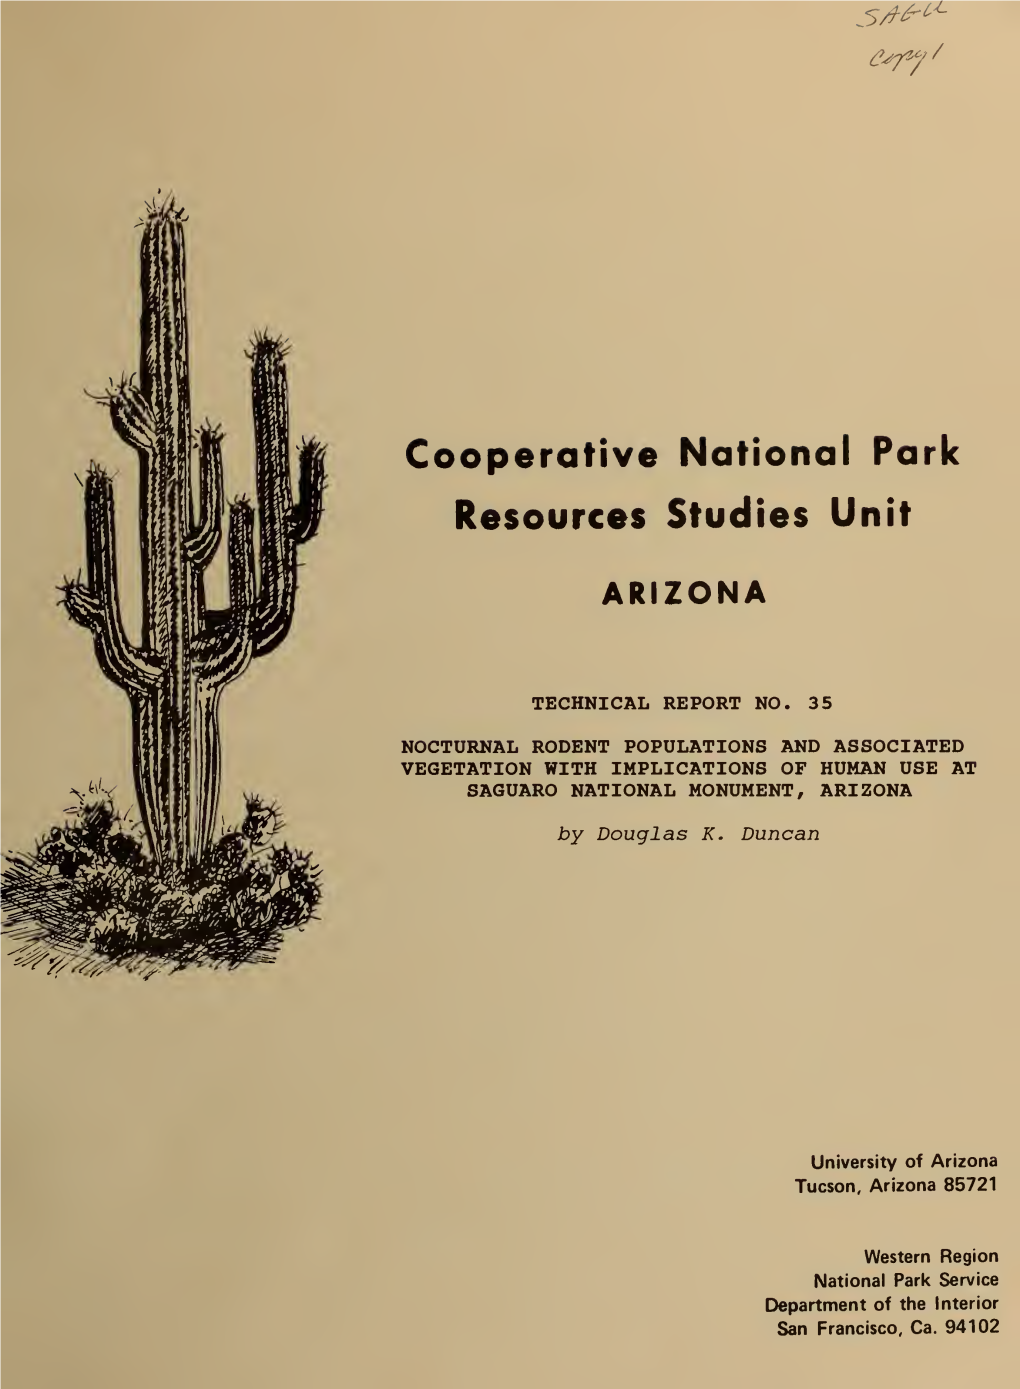 Nocturnal Rodent Populations and Associated Vegetation with Implications of Human Use at Sa6uaro National Monument, Arizona